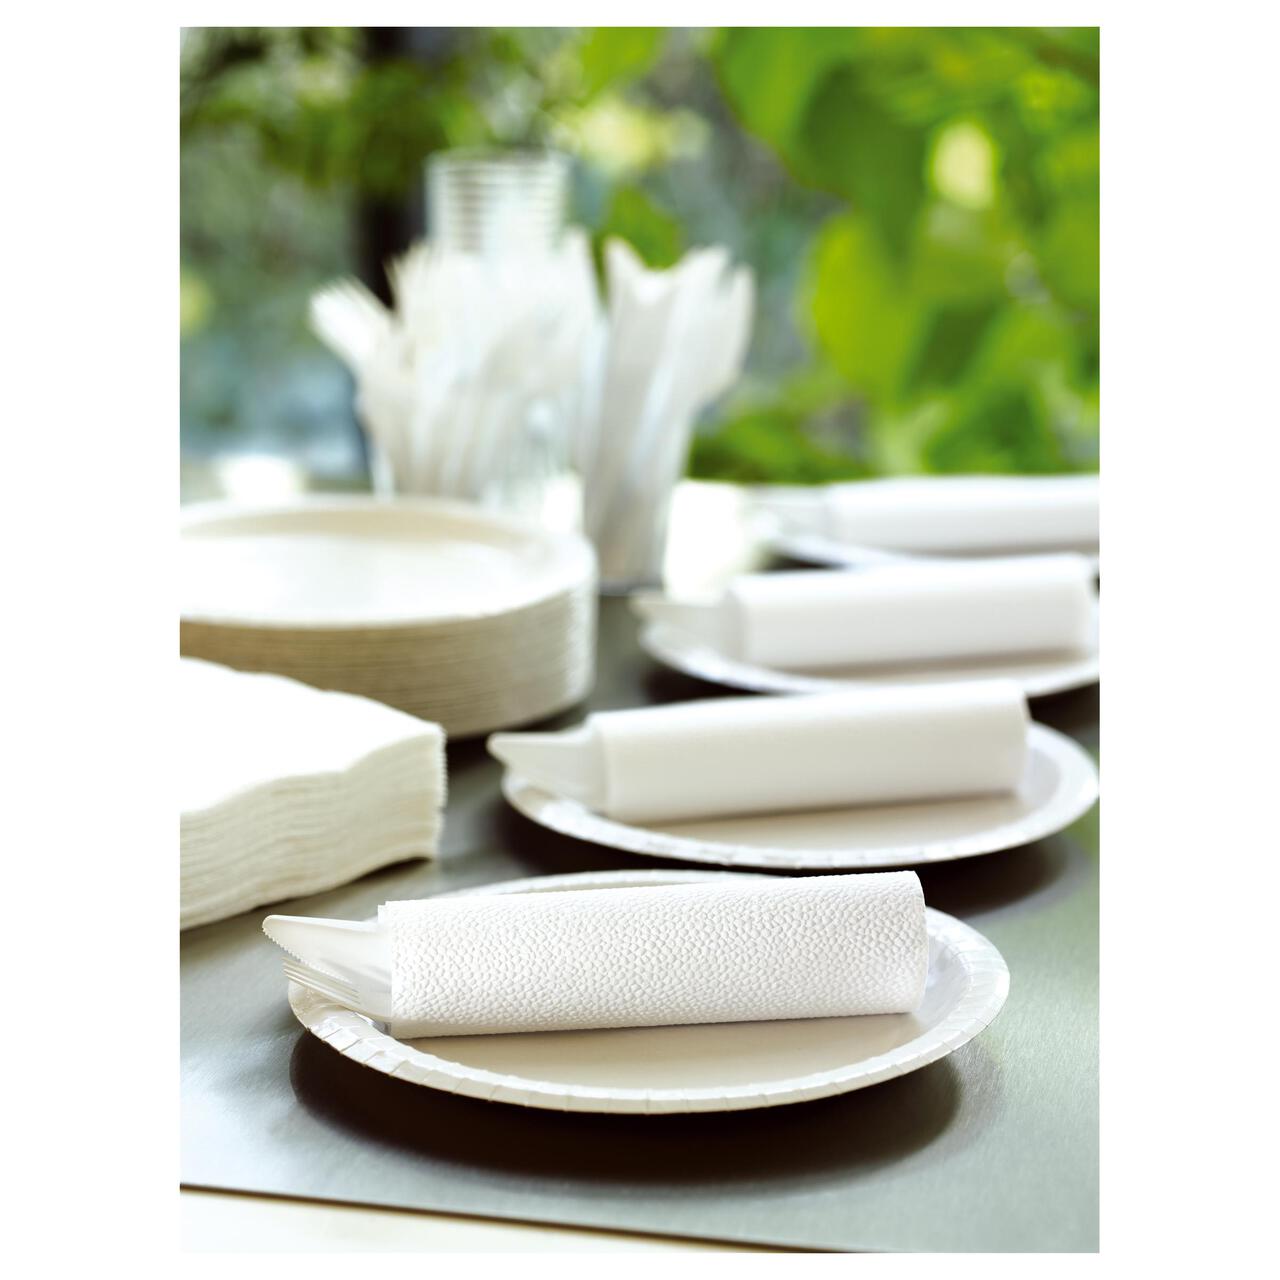 White 22cm Recyclable Paper Plates 50 per pack